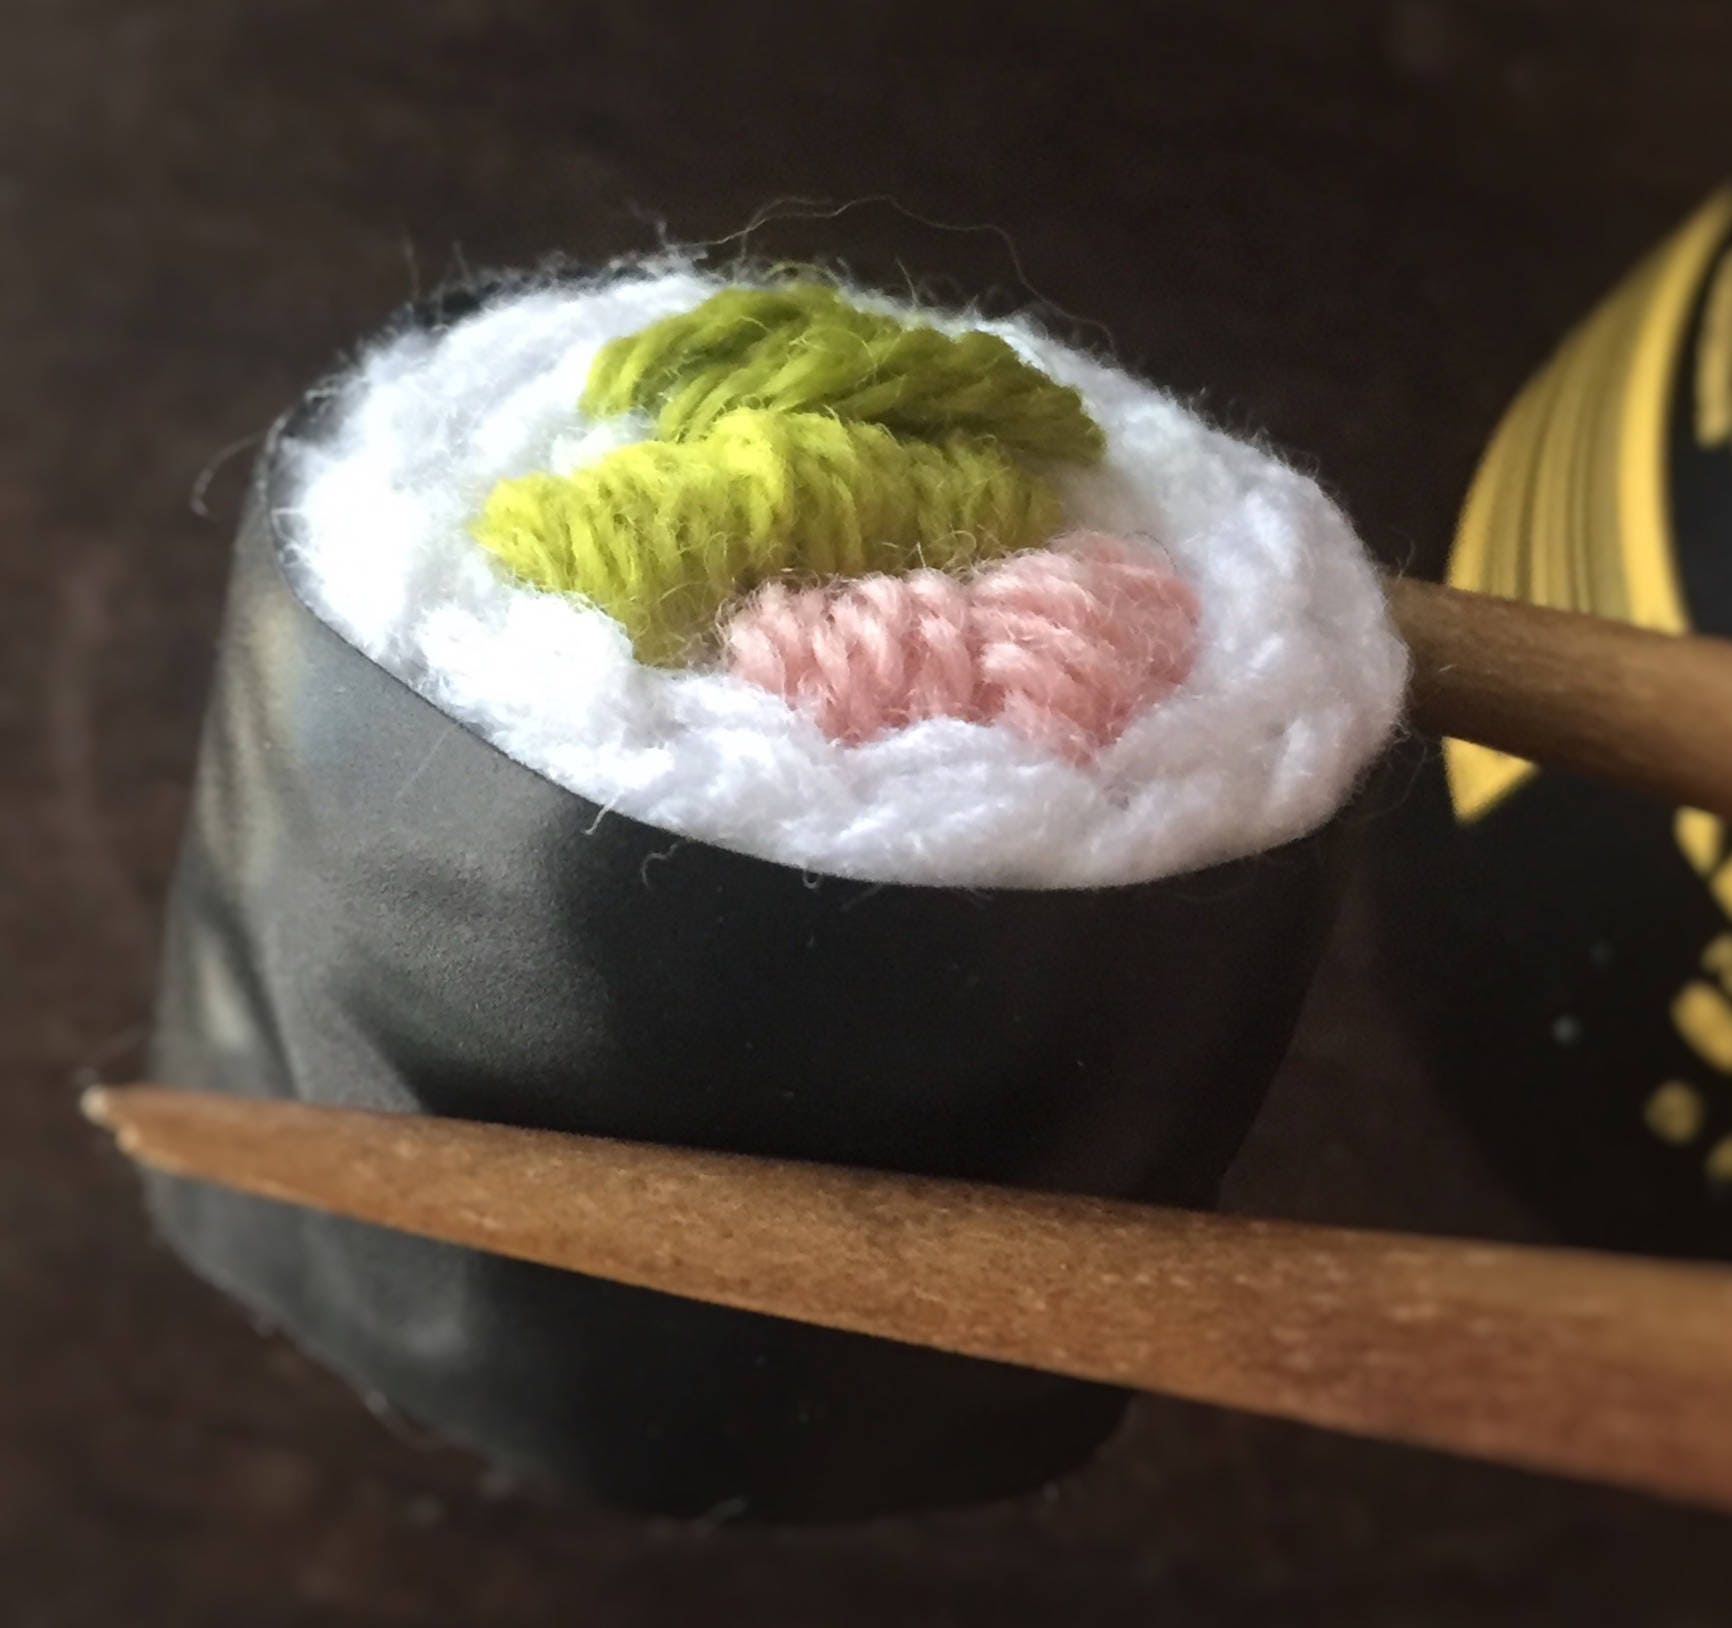 Crochet a Colorful Sushi Set For Play Or Display … Yum!